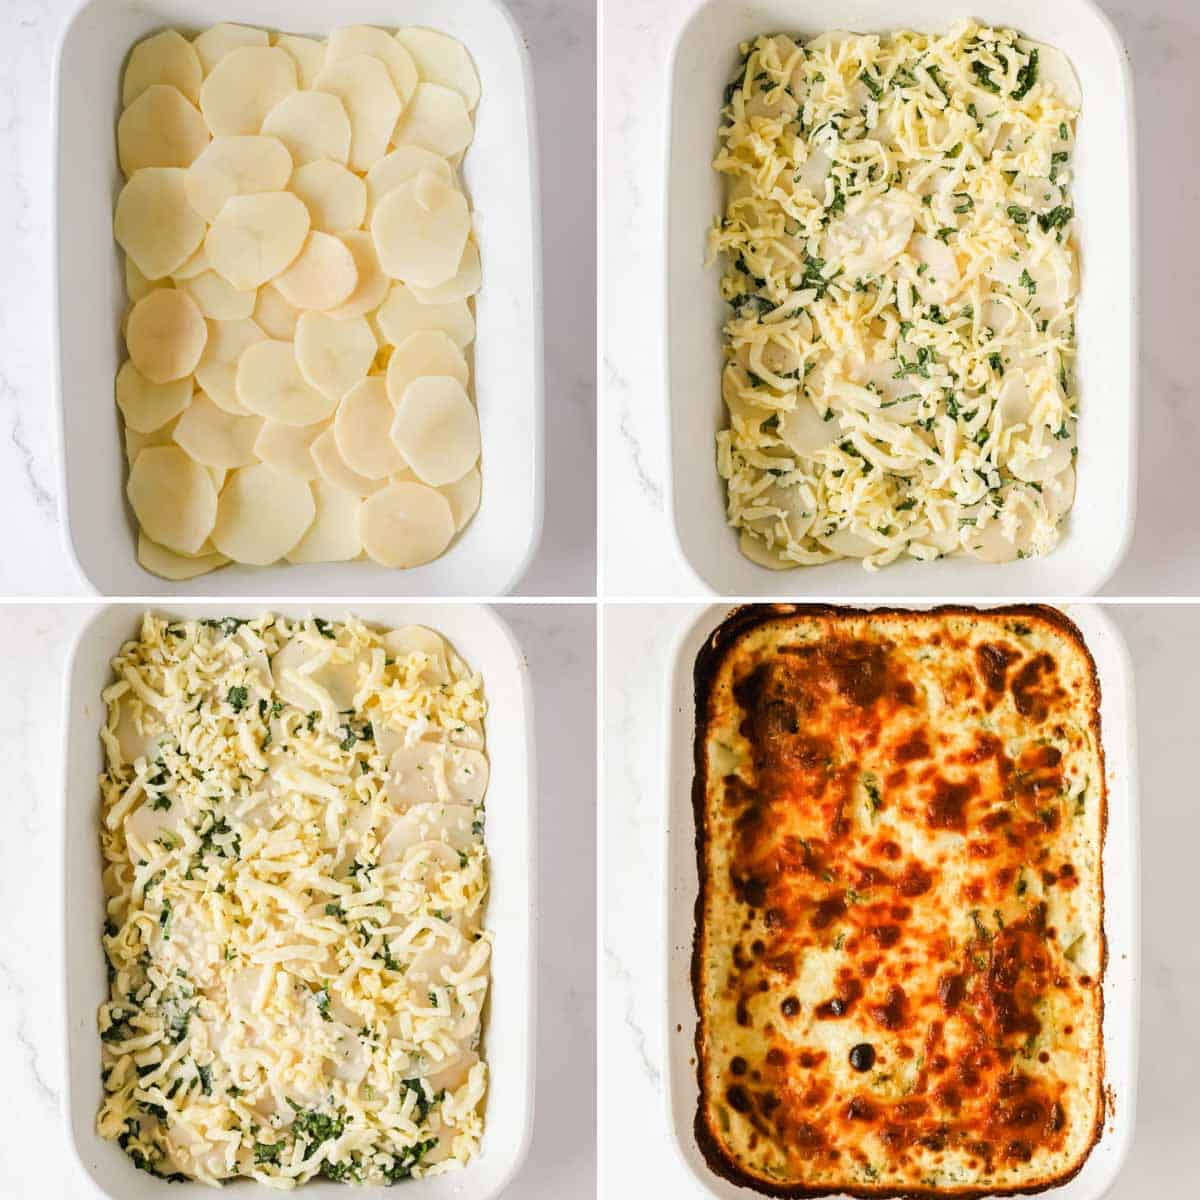 Four images showing the process of creating cheesy scalloped potatoes.